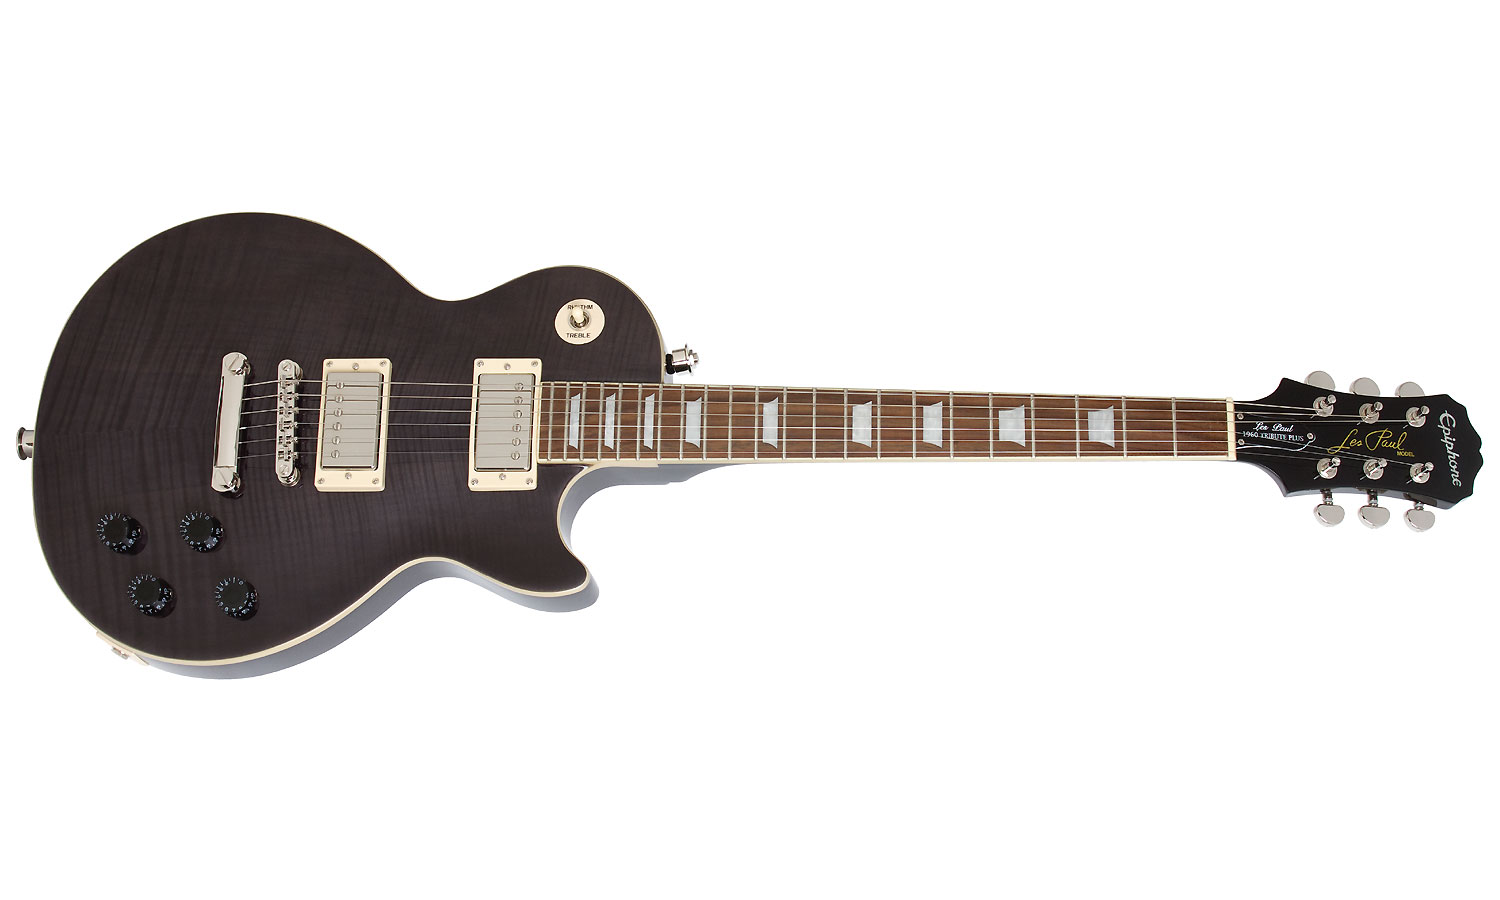 Epiphone Les Paul Tribute Plus Outfit Ch - Midnight Ebony - Single cut electric guitar - Variation 1